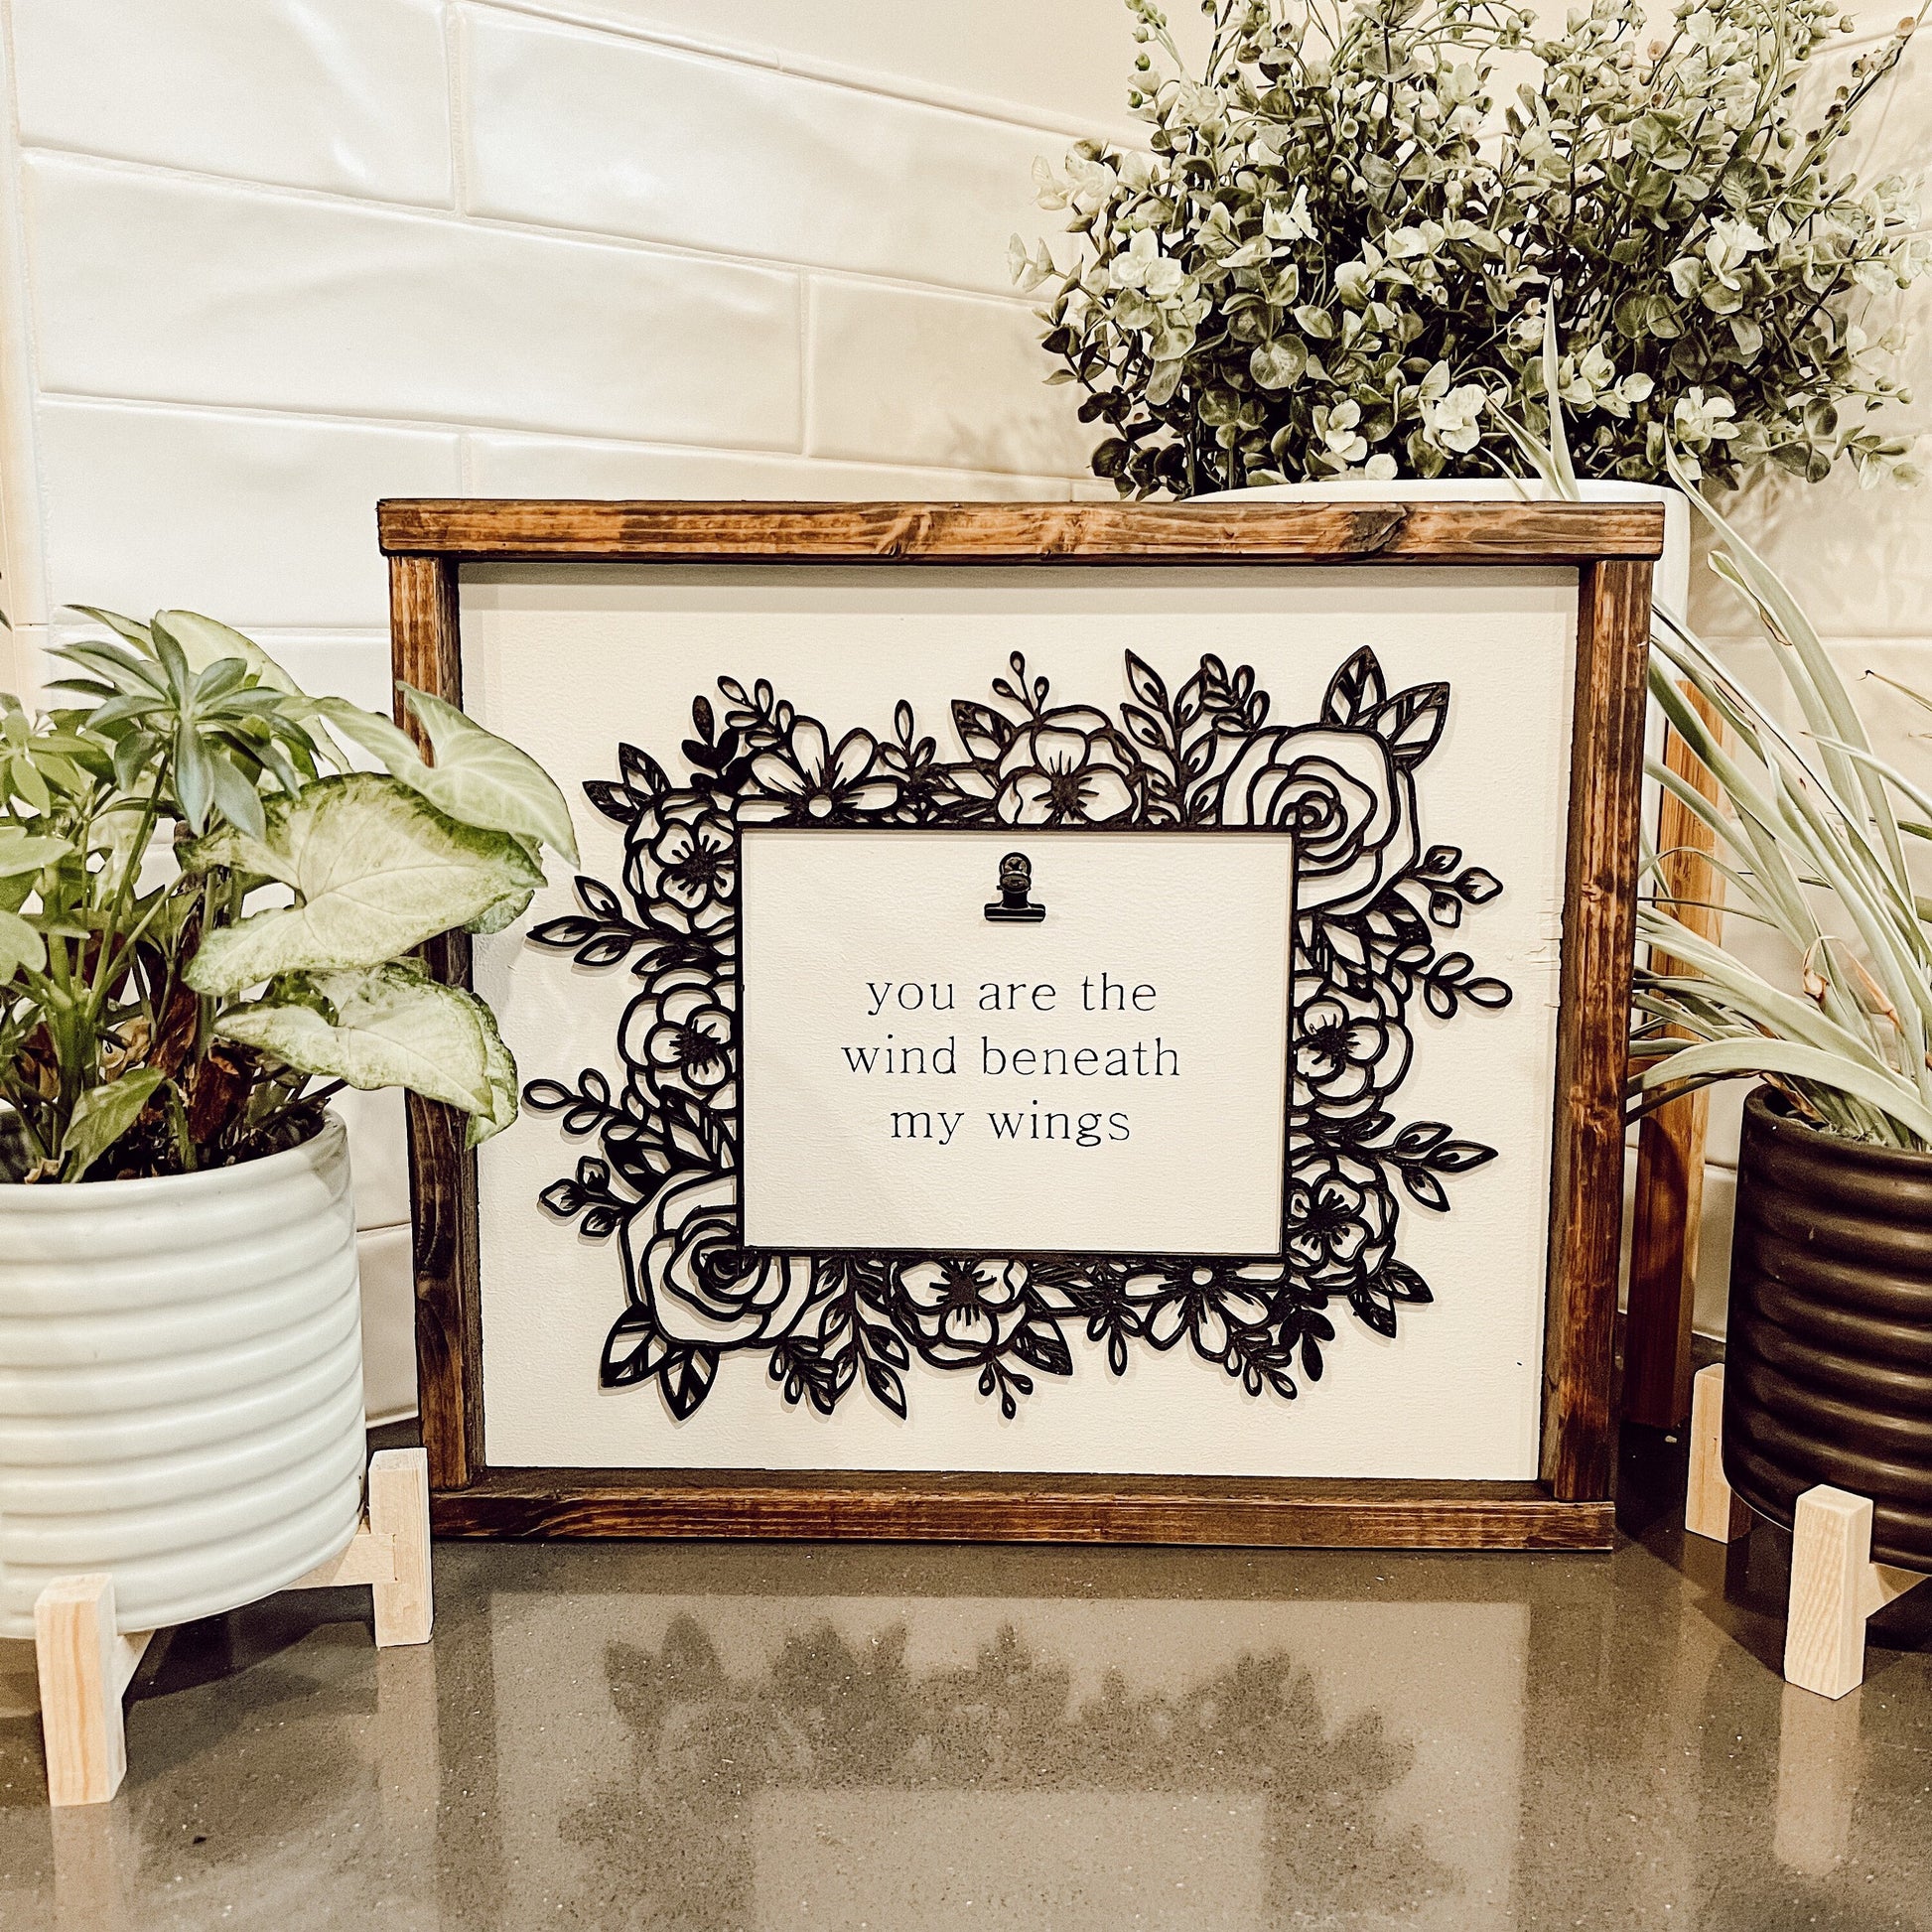 Mother’s Day gift floral frame, special hidden message [FREE SHIPPING]